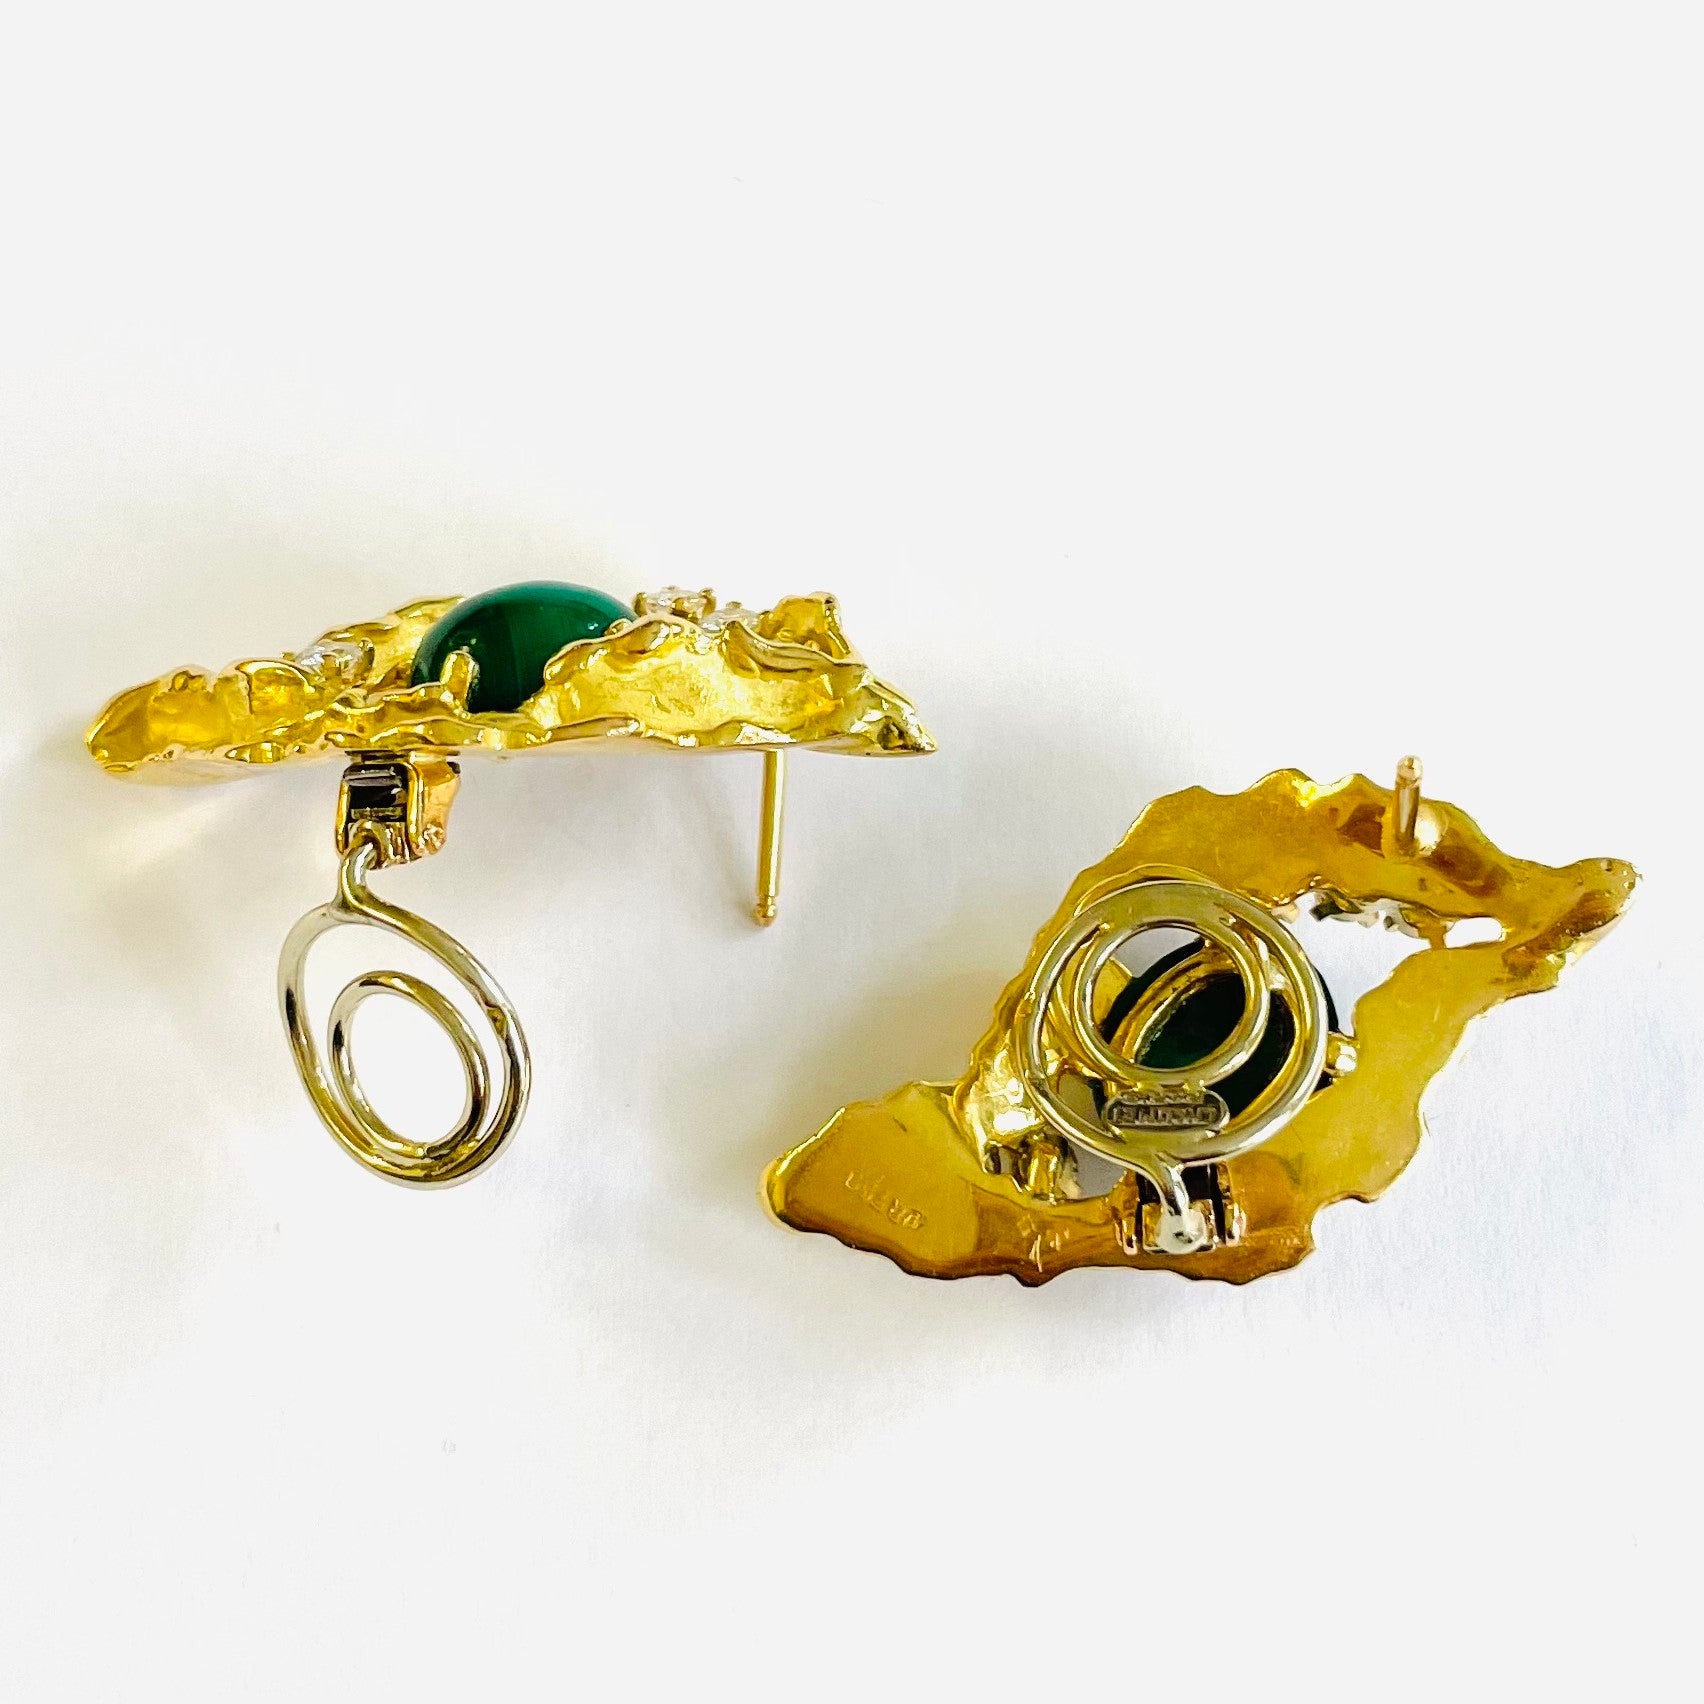 Chaumet French 1960s 18KT Yellow Gold Malachite & Diamond Earrings back and side